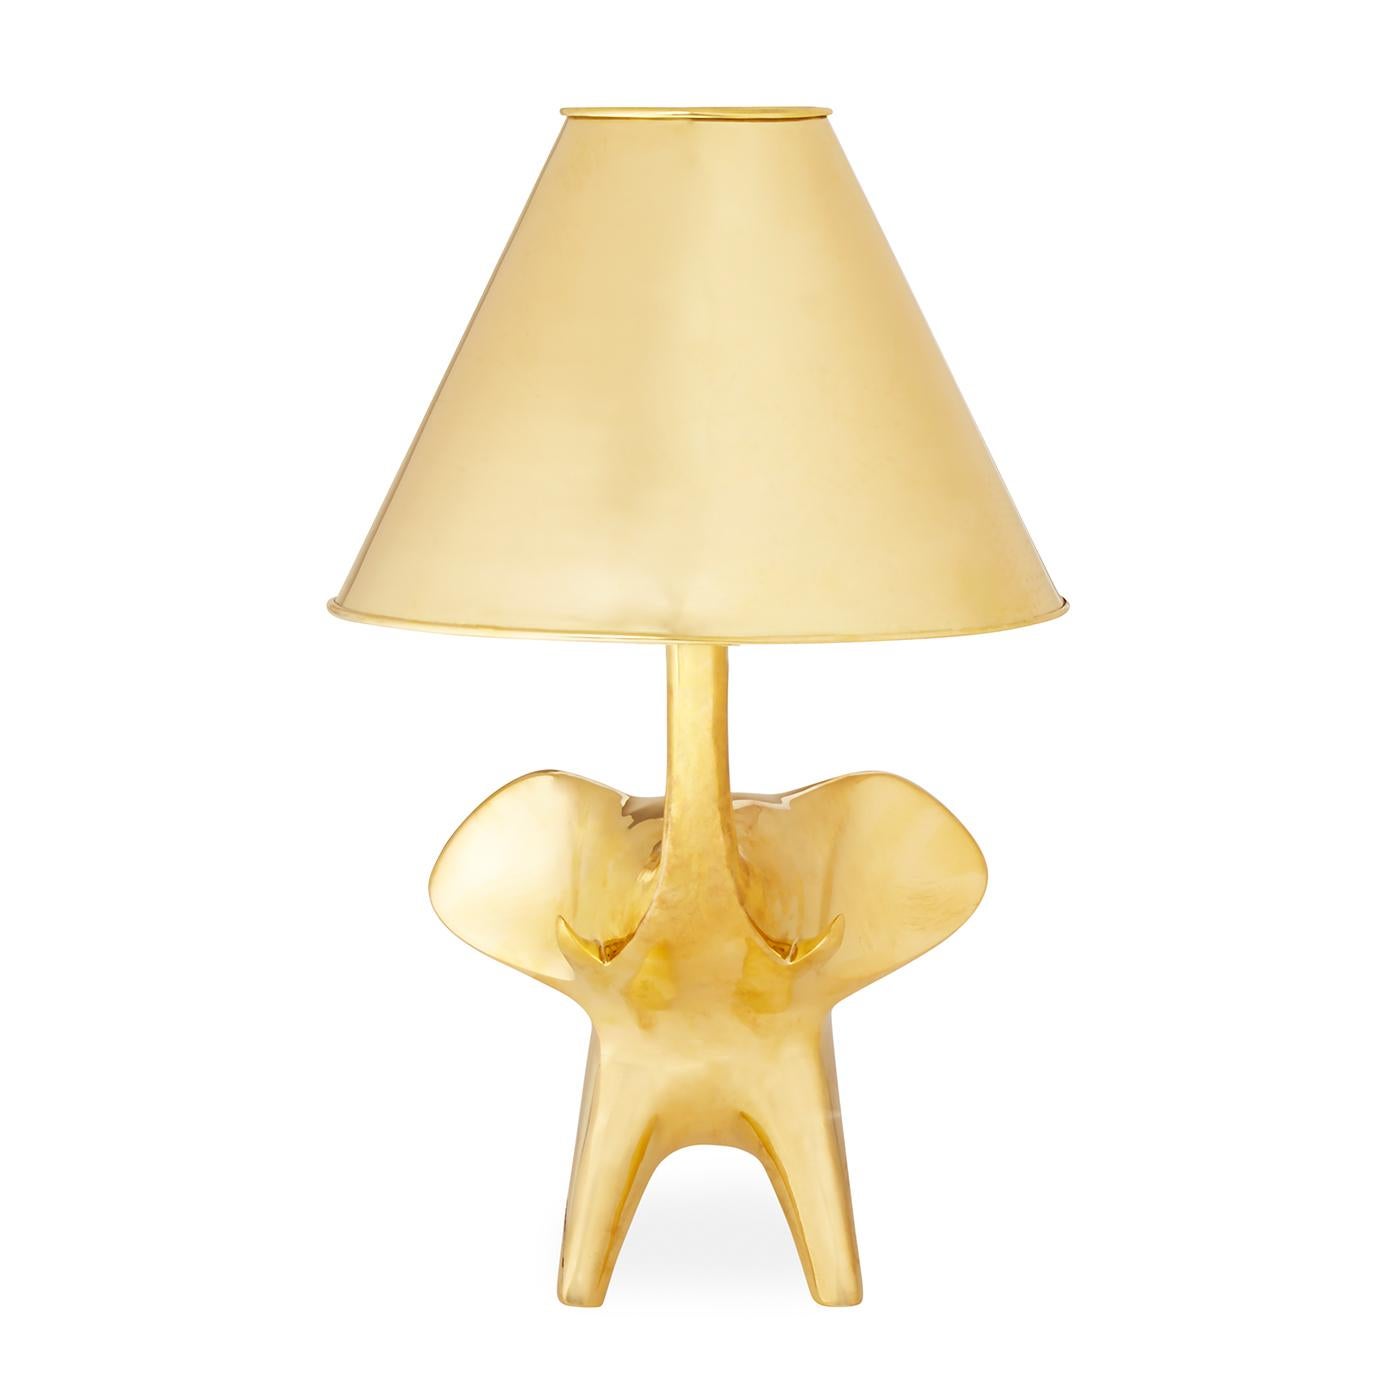 Posh Pachyderm. As majestic as it is mignon, our brass elephant table lamp is radically radiant. JA originally sculpted the pachyderm in our Soho pottery studio then rendered it in solid brass, including the couture-tapered shade. The perfect blend